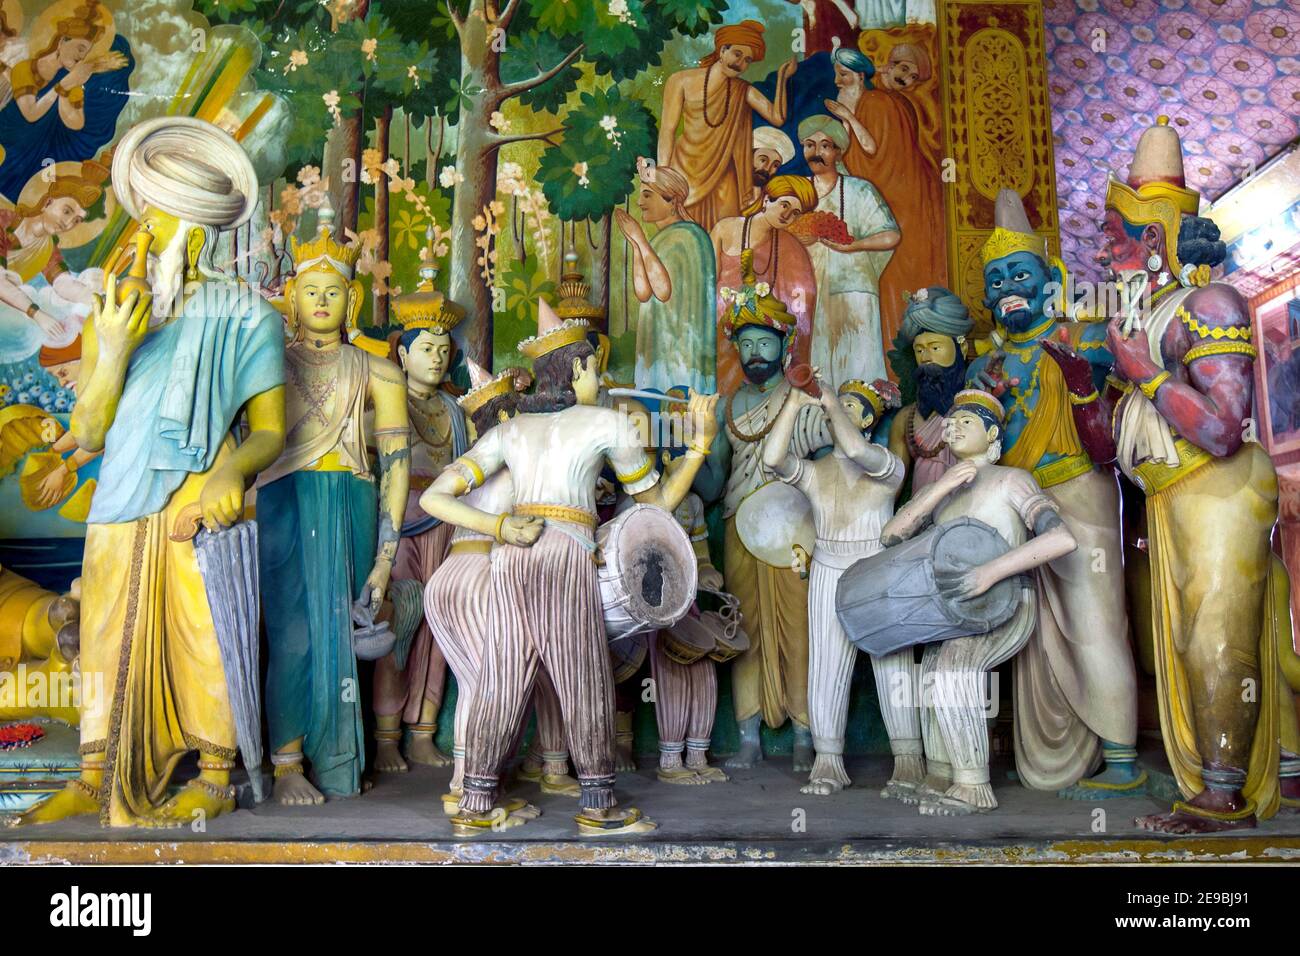 A colourful display of human figures including musicians and drummers in the main Image House at Wewurukannala Vihara at Dickwella. Stock Photo